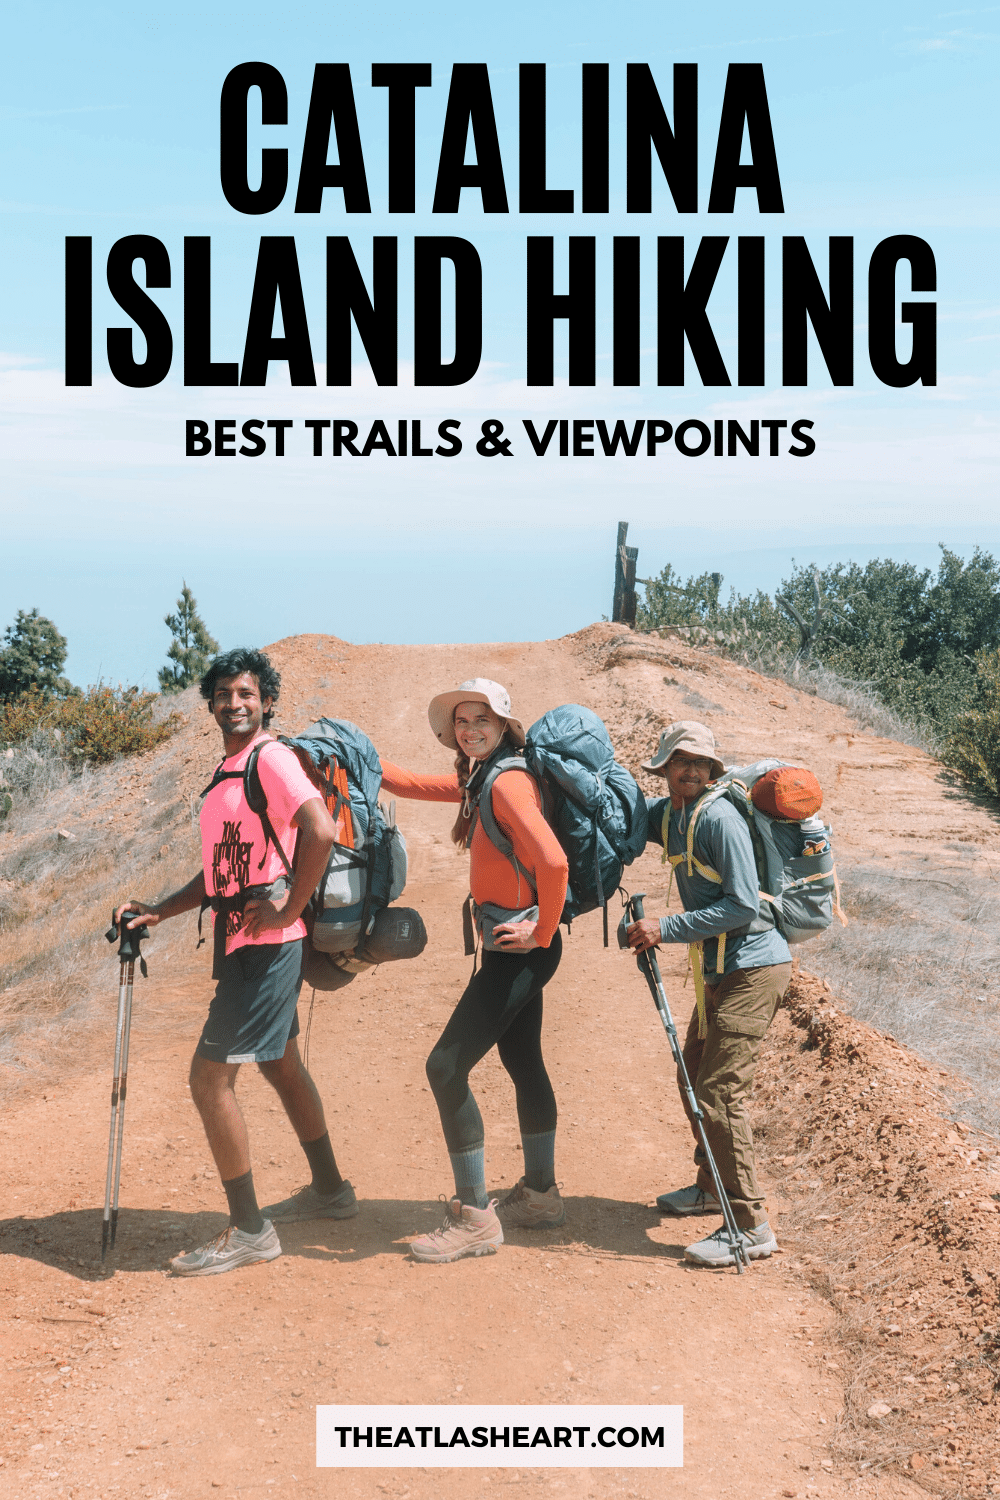 Catalina Island Hiking Guide: Best Trails & Viewpoints on the Island